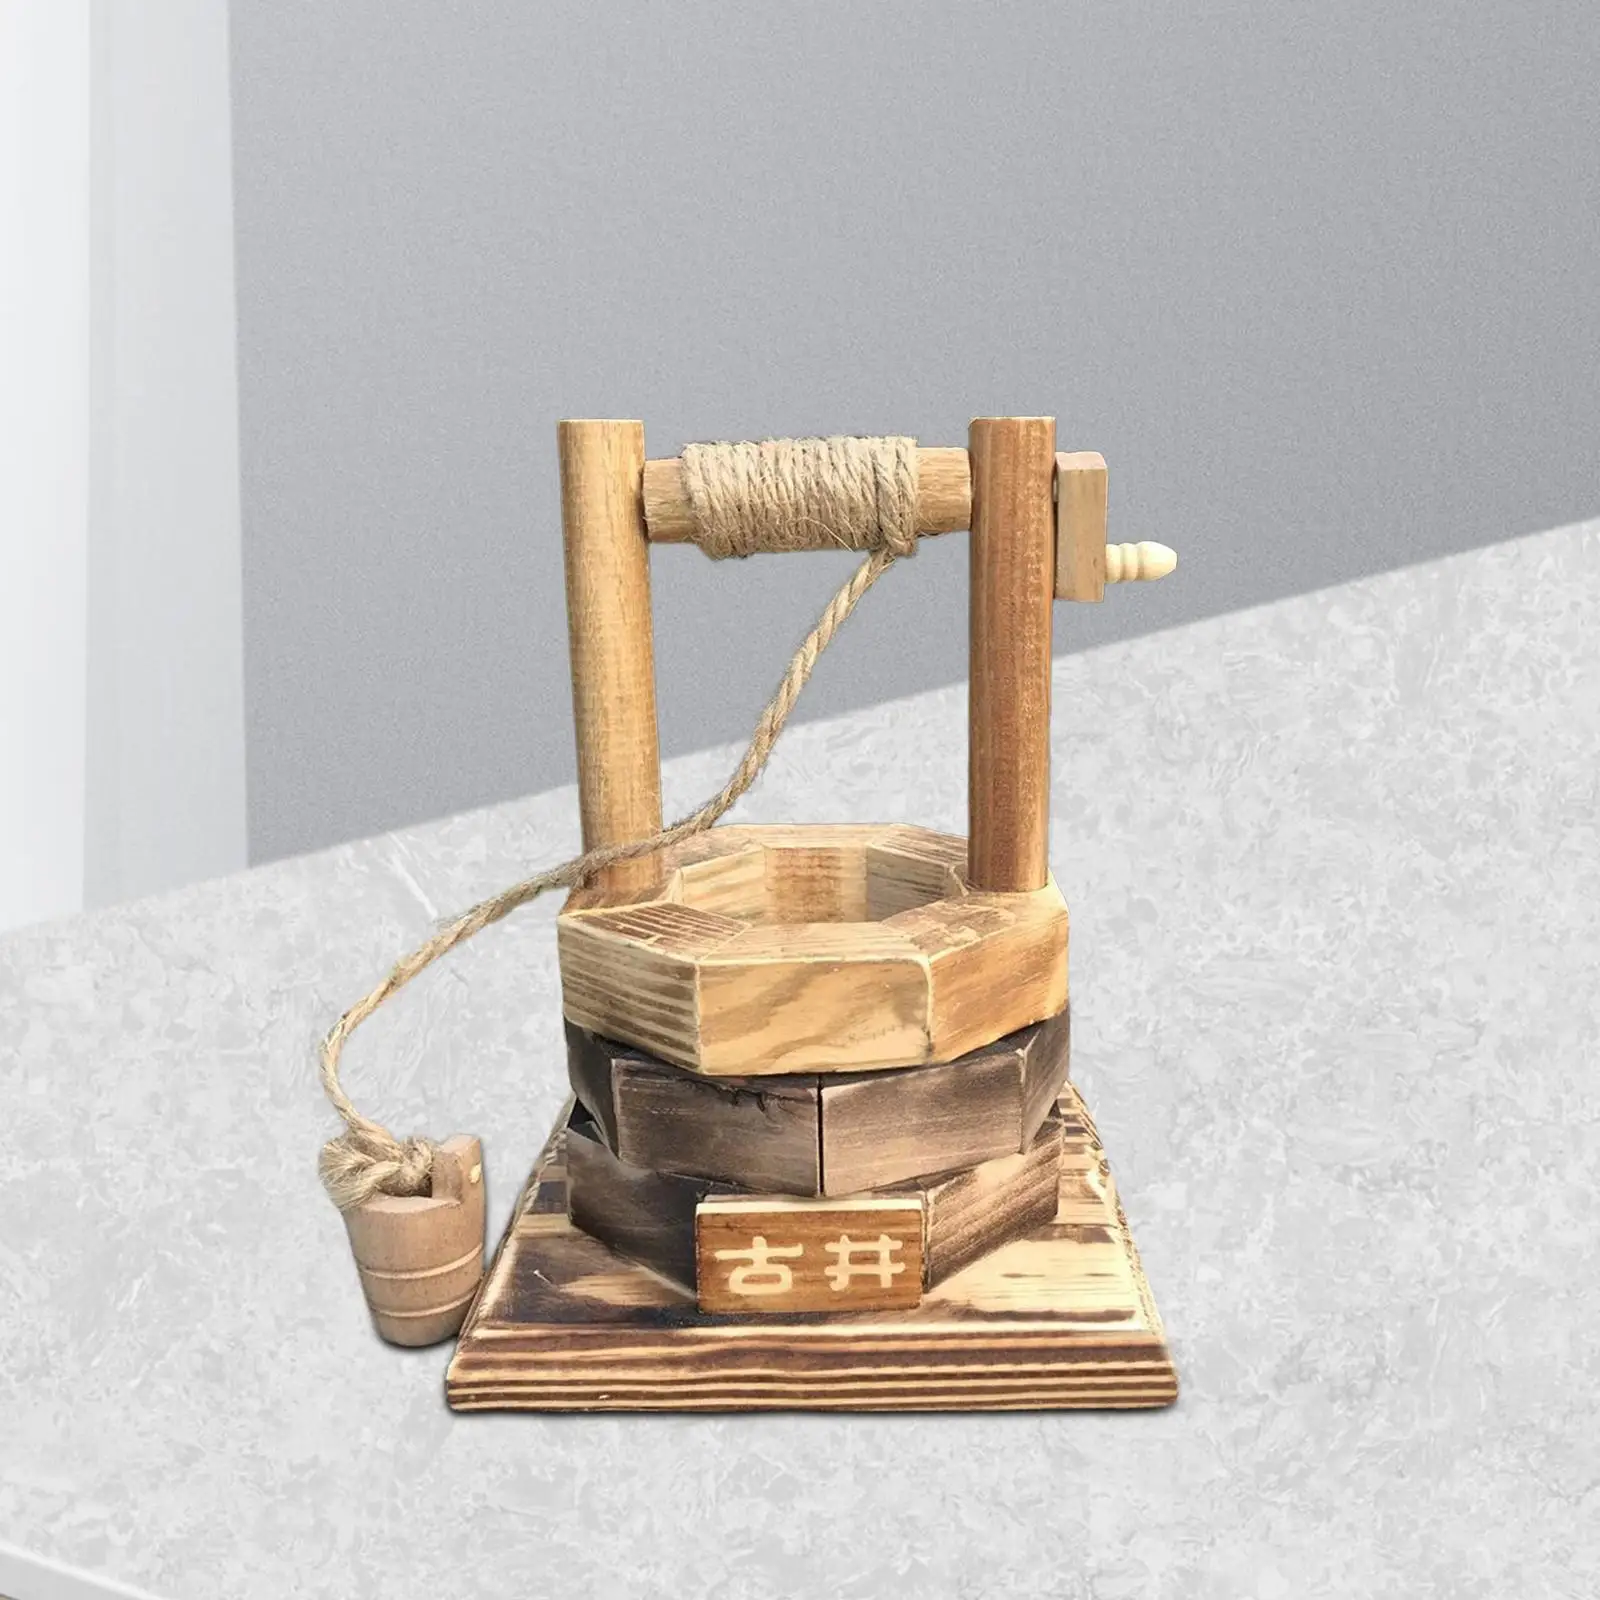 Simulation Wooden Well Model Miniatures Collectible Ornament Desk Decoration